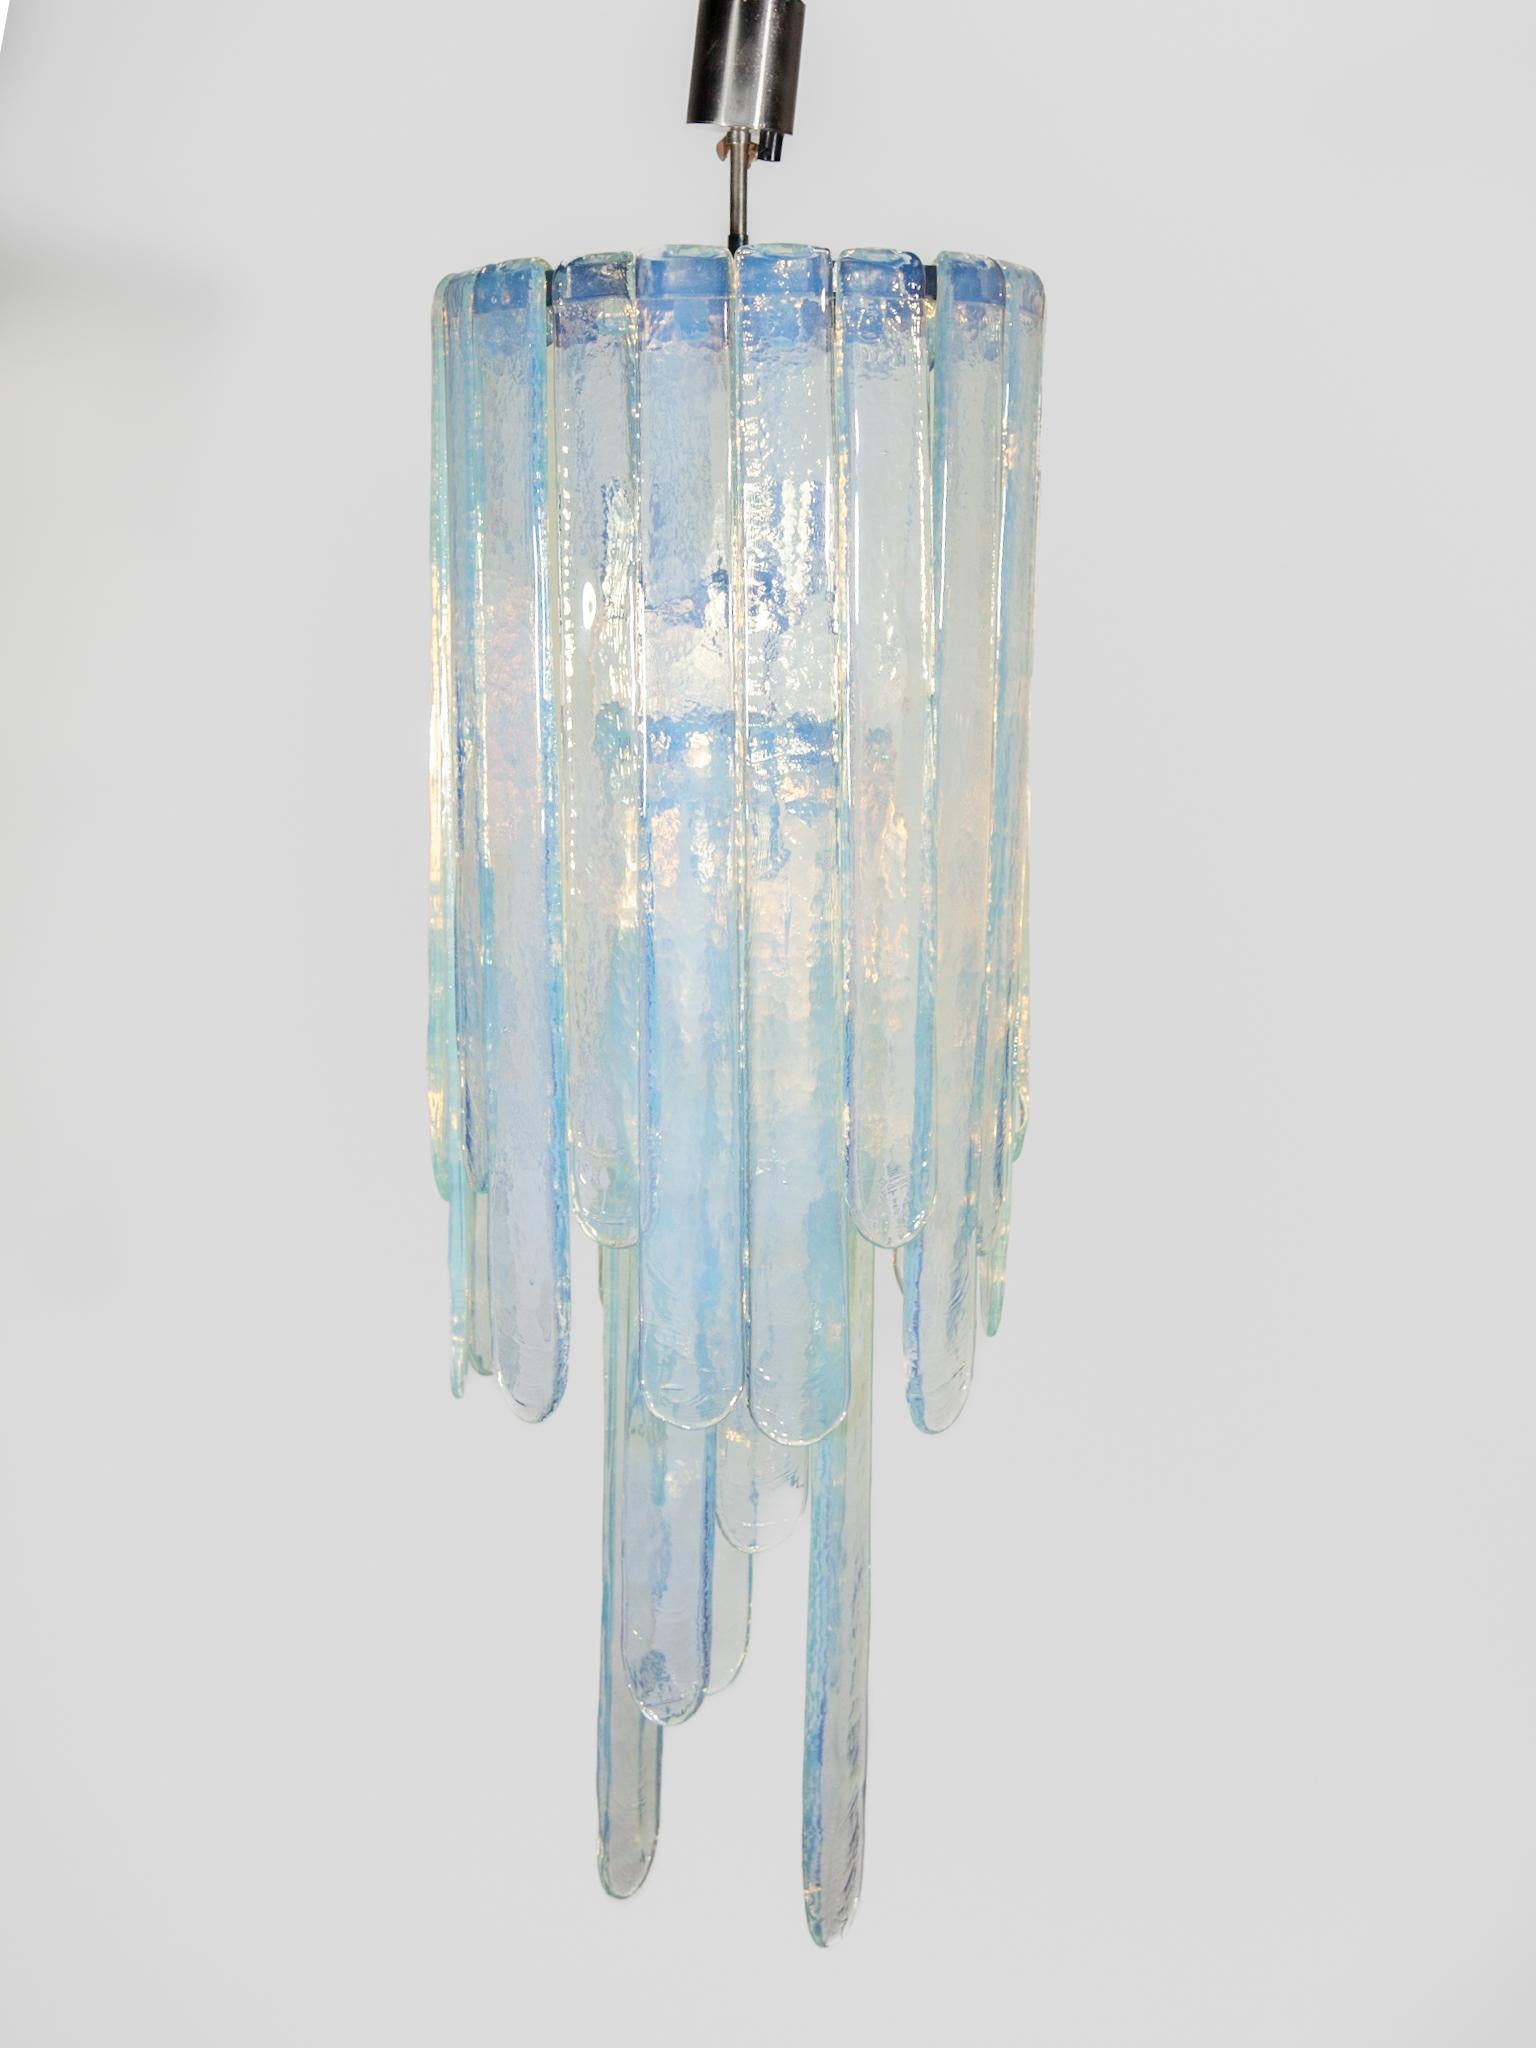 Mid-20th Century Opalescent Glass Chandelier designed by Carlo Nason for Mazzega, 1960s For Sale